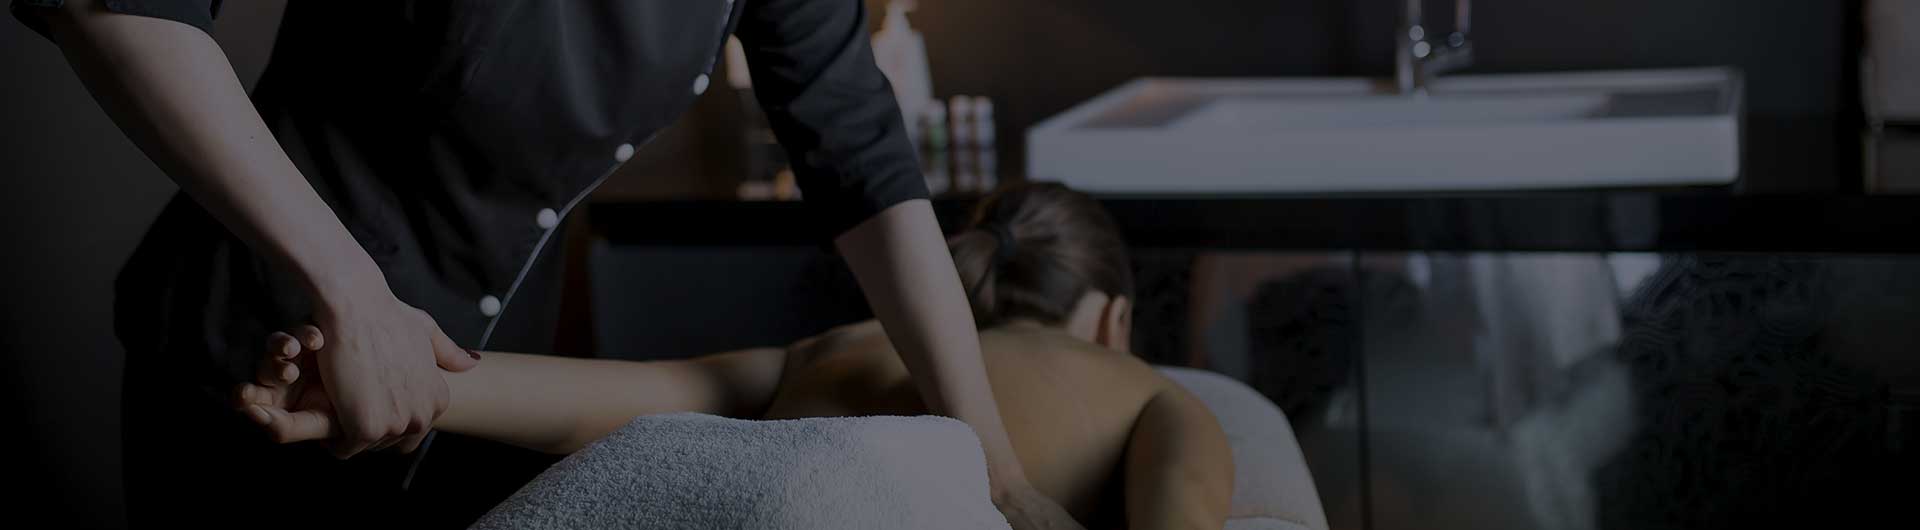 Massage therapist with a client.